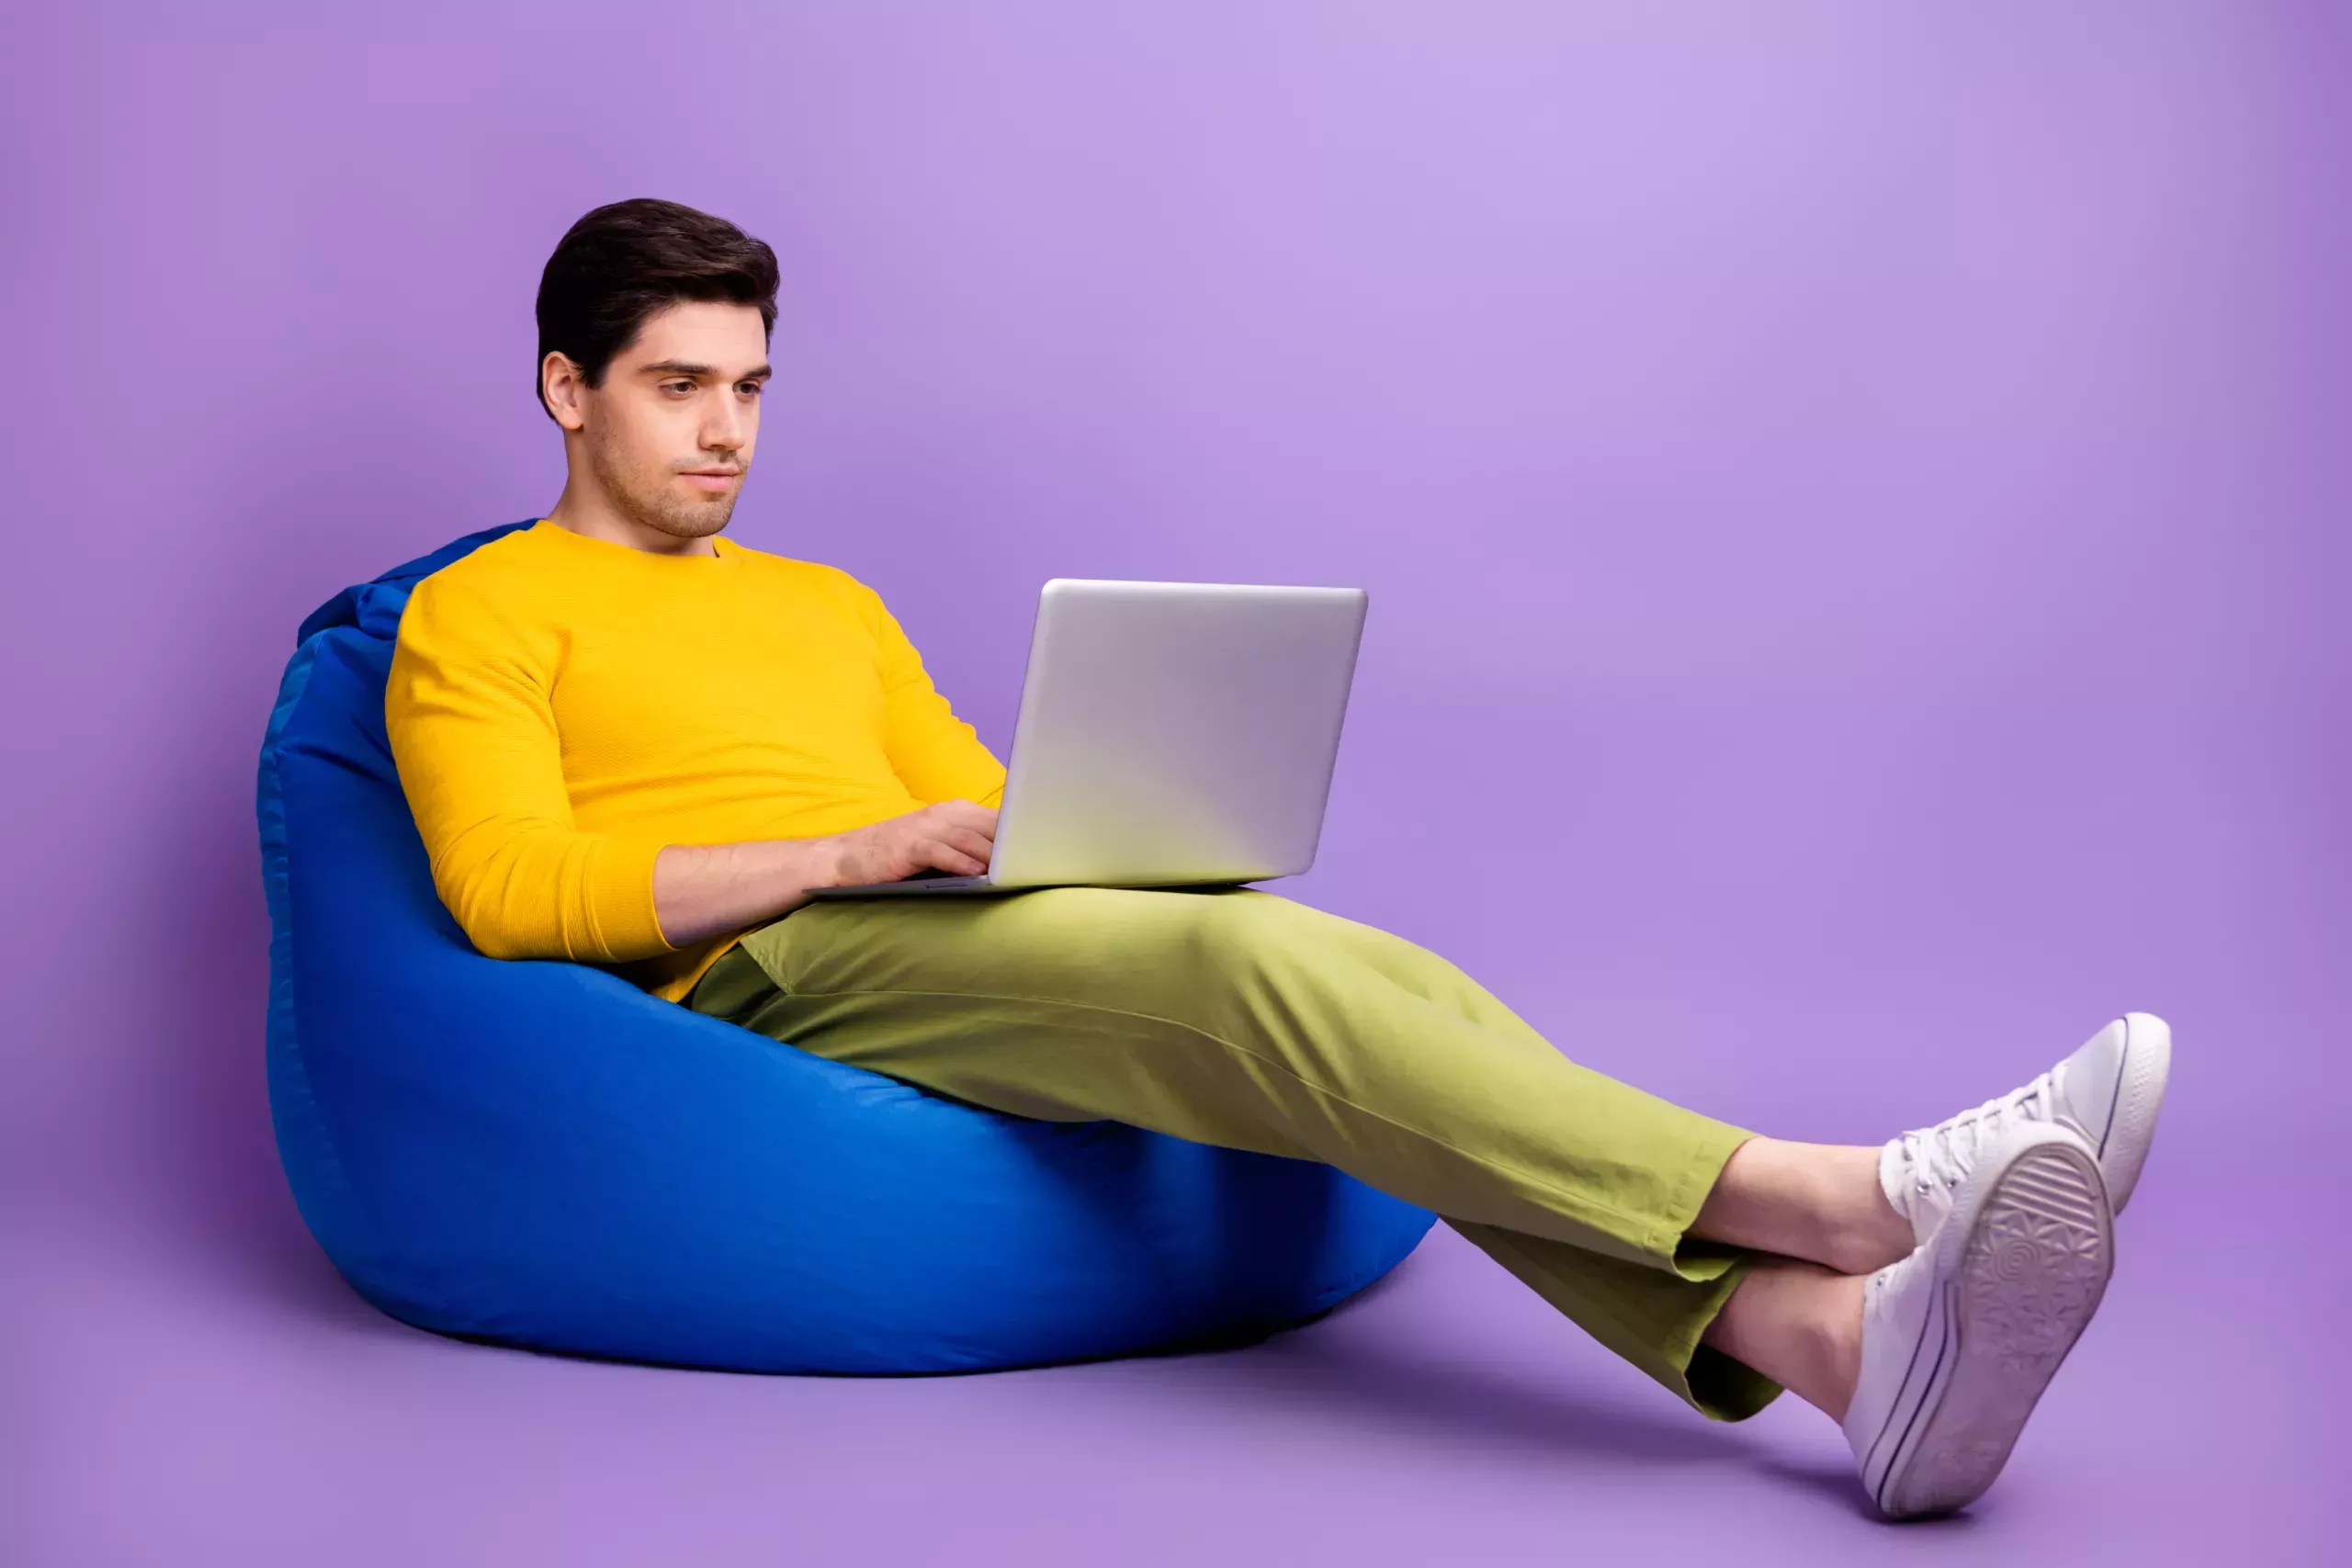 A man wearing a yellow shirt on the computer and sitting on a bean bag. 